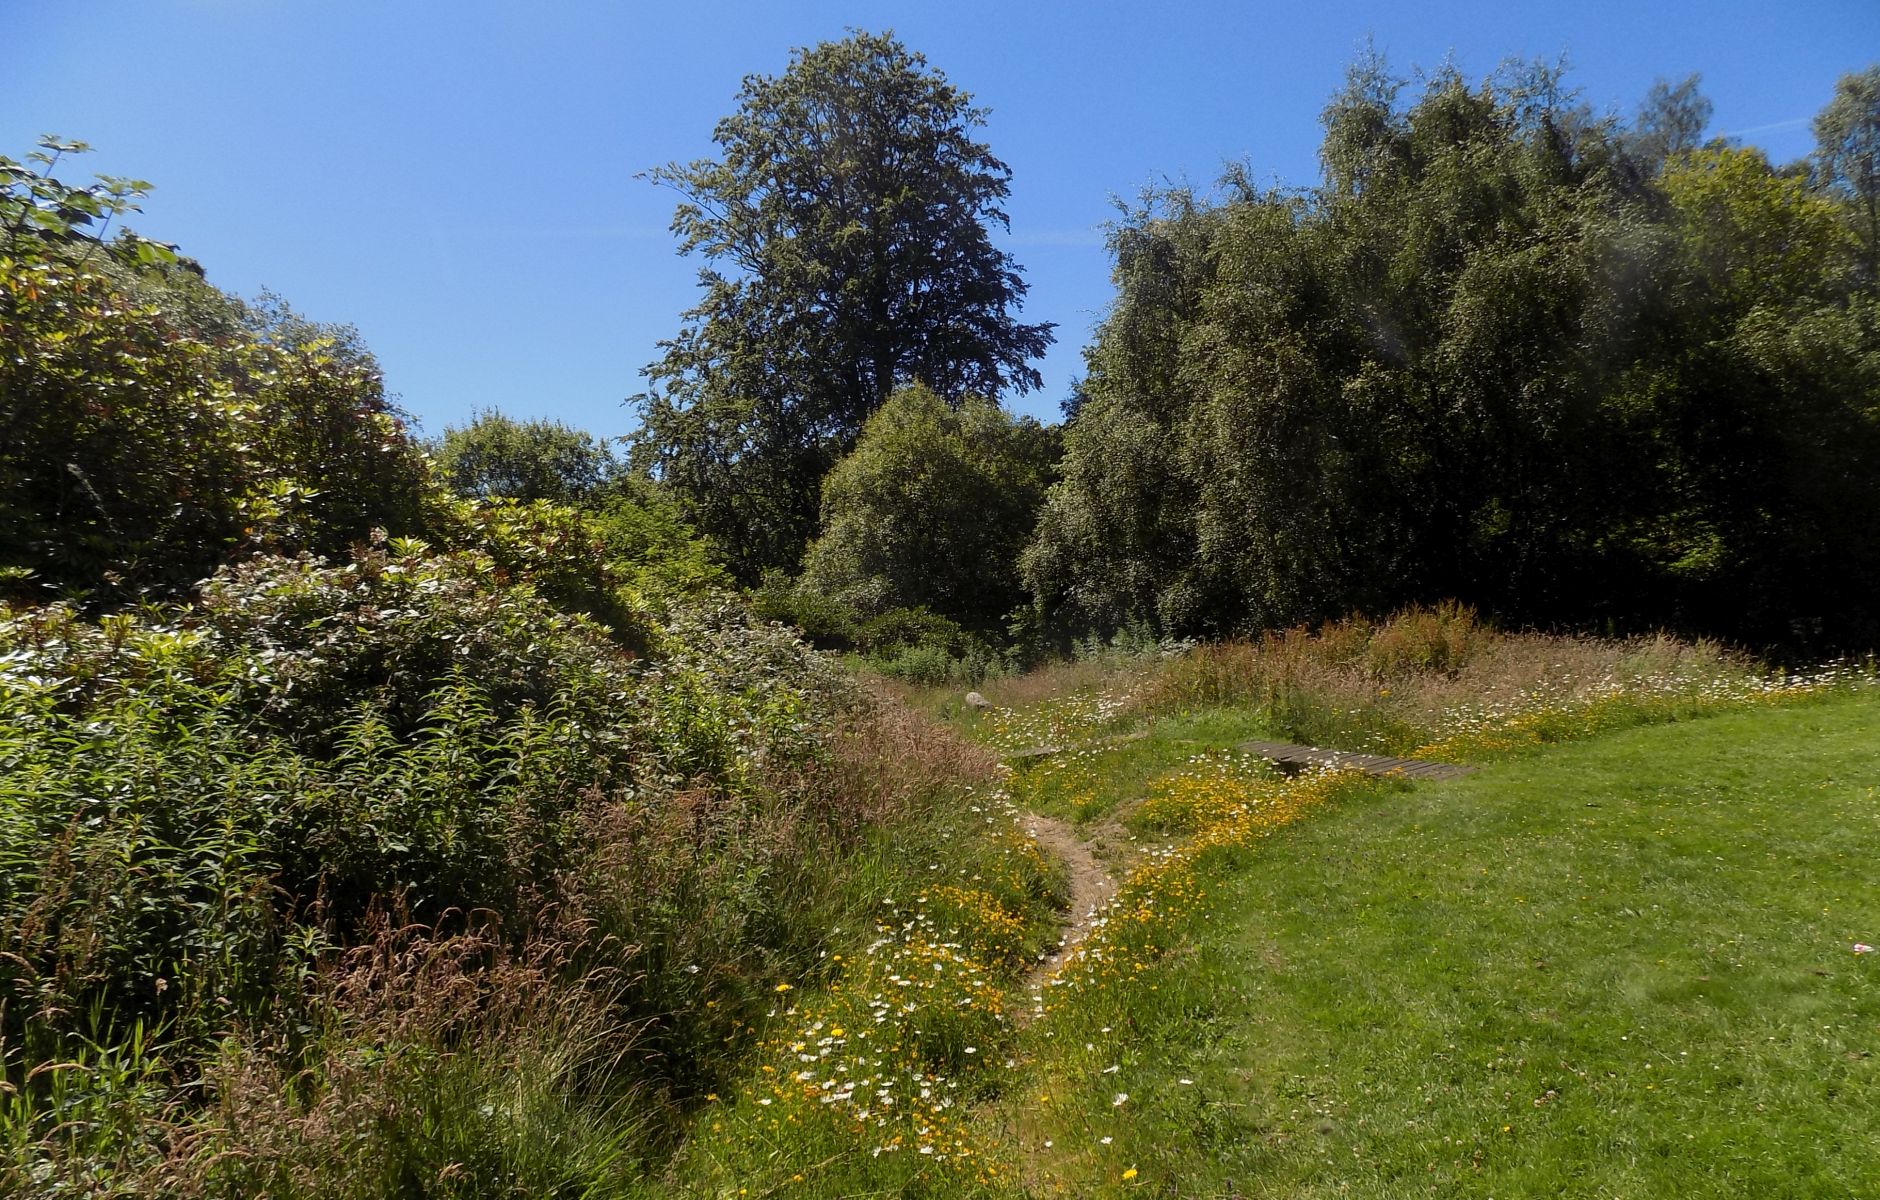 Wild Flowers and Woodlands in Plean Park